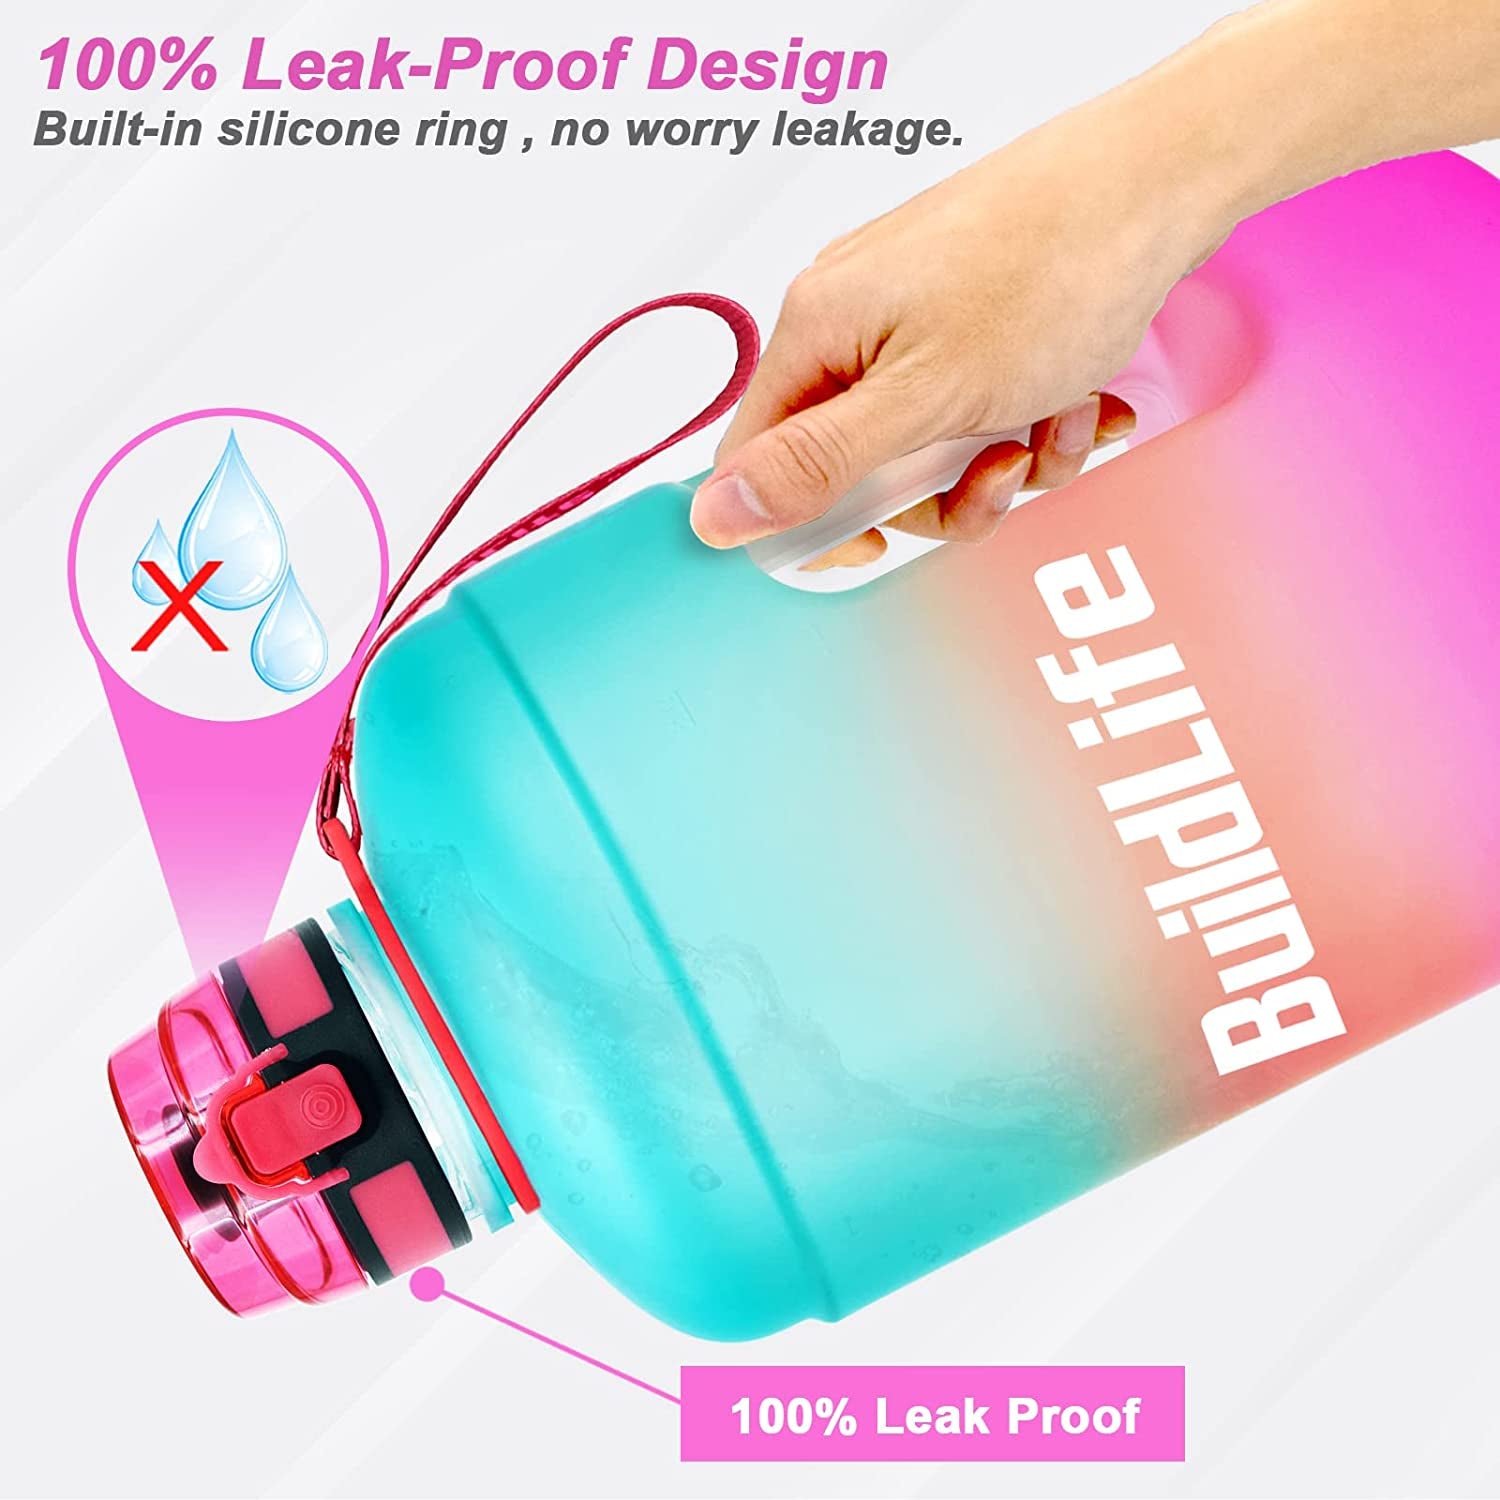 Gallon Water Bottles with Times to Drink - Gallon Water Jug - 1 Gallon Water Bottle–128 Oz Water Bottle,One Gallon Water Bottle with Time Marke and Flip Top Leak Proof Lid for Gym